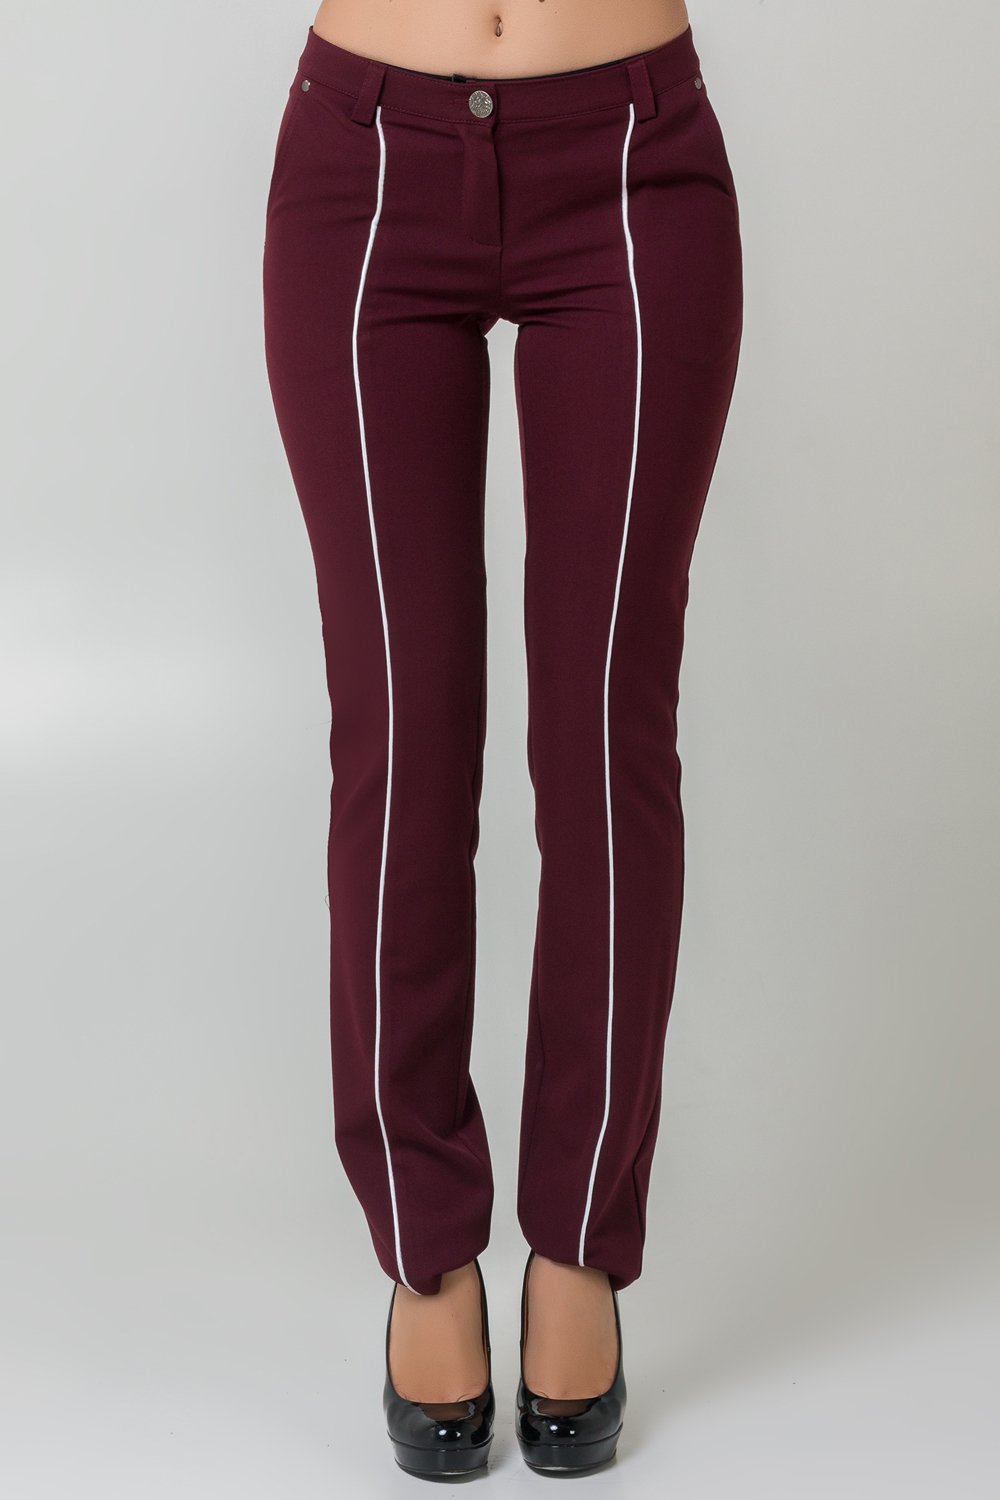 Trousers with stripes in burgundy